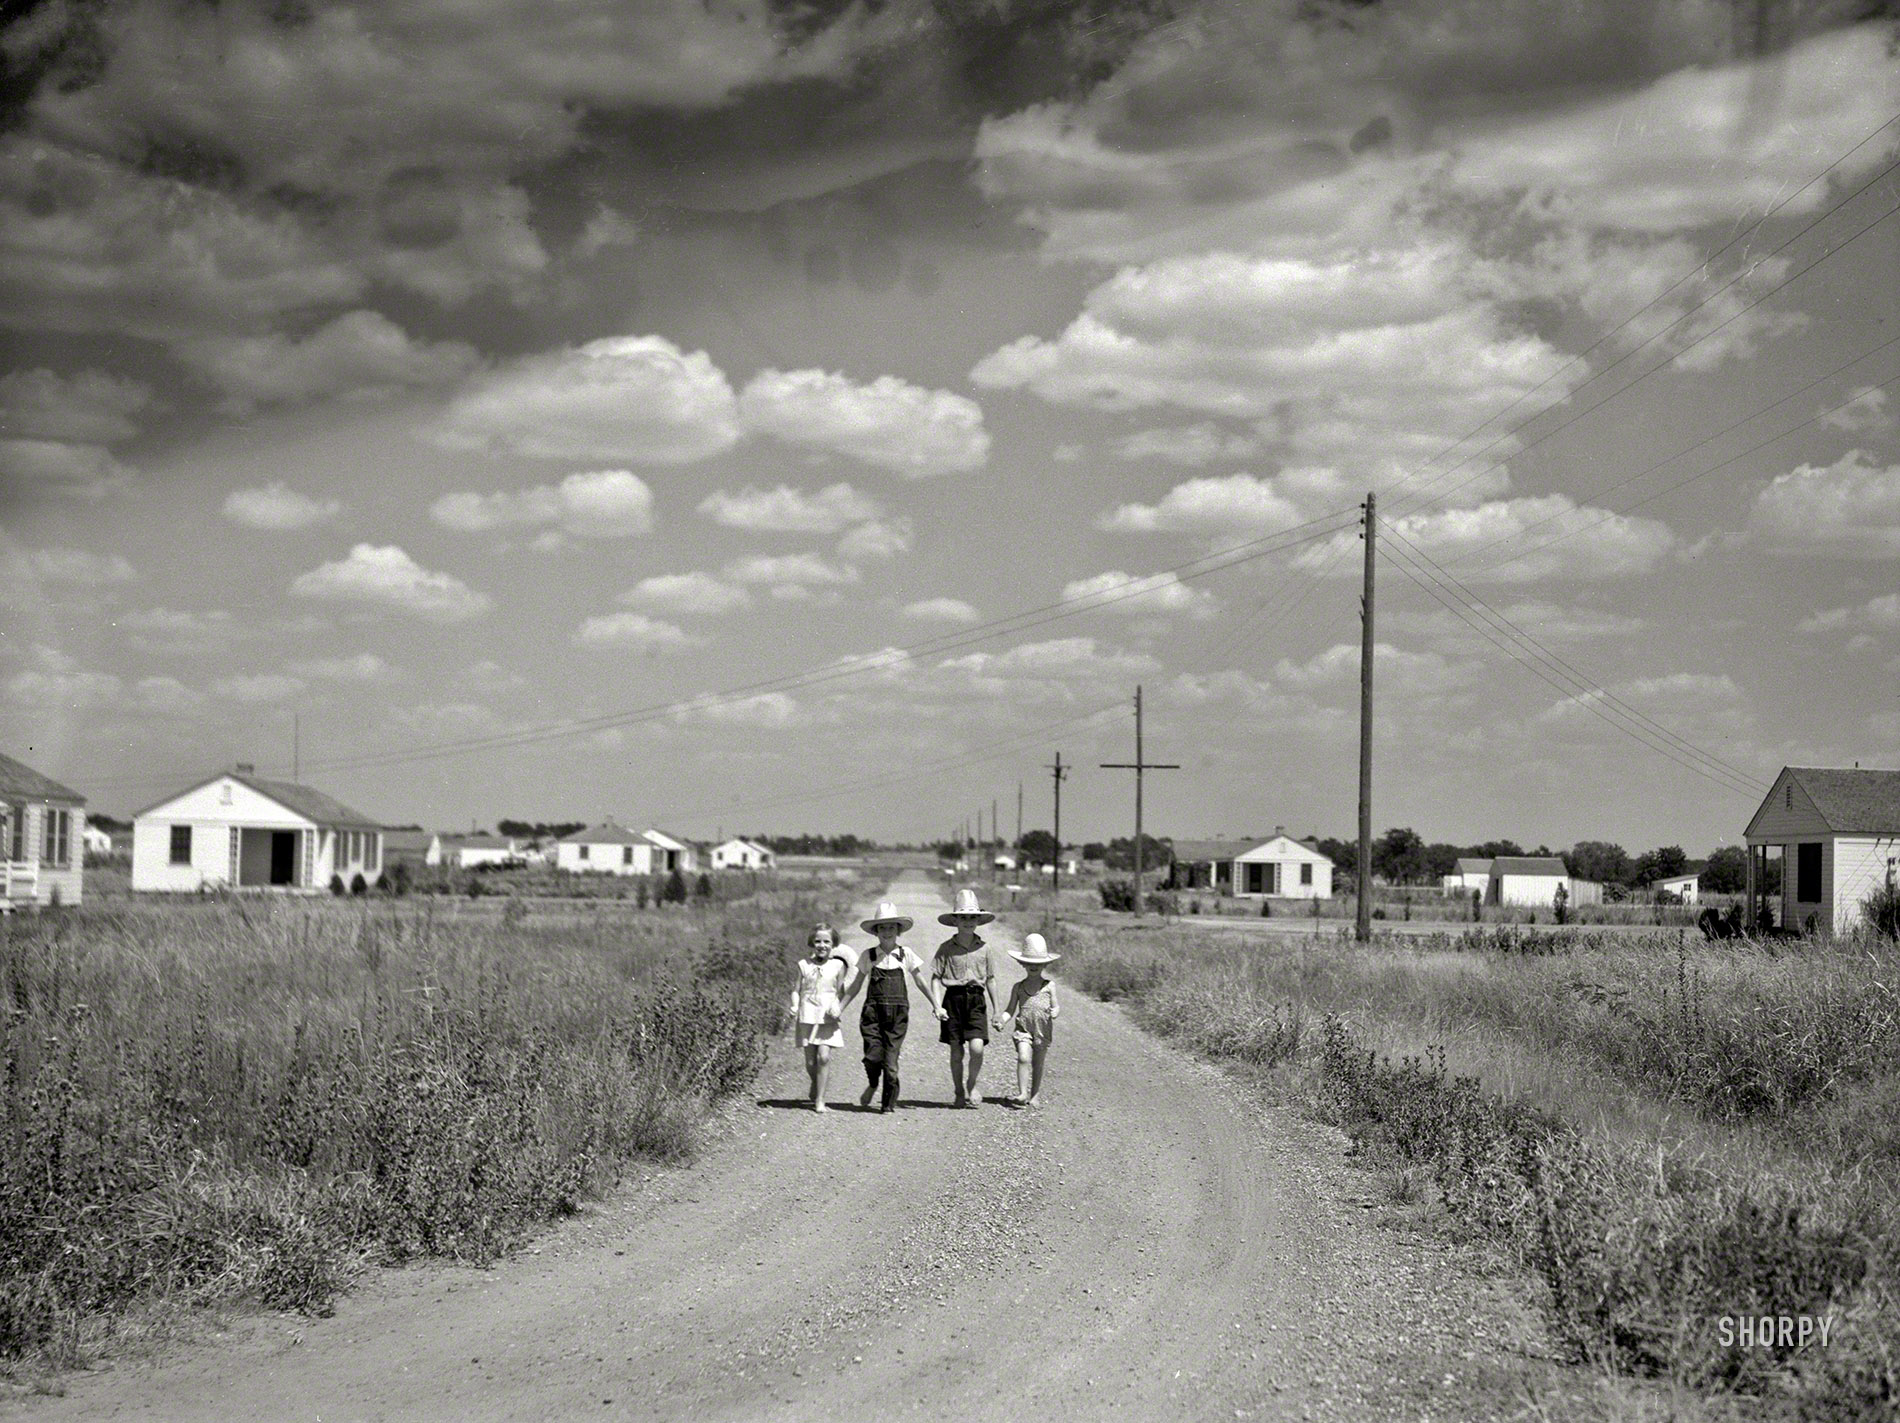 Summer 1936. "Dalworthington Gardens, Texas." Half-pints in ten-gallon hats in a "subsistence homestead project" established under the authority of the National Industrial Recovery Act. Photo by Arthur Rothstein. View full size.